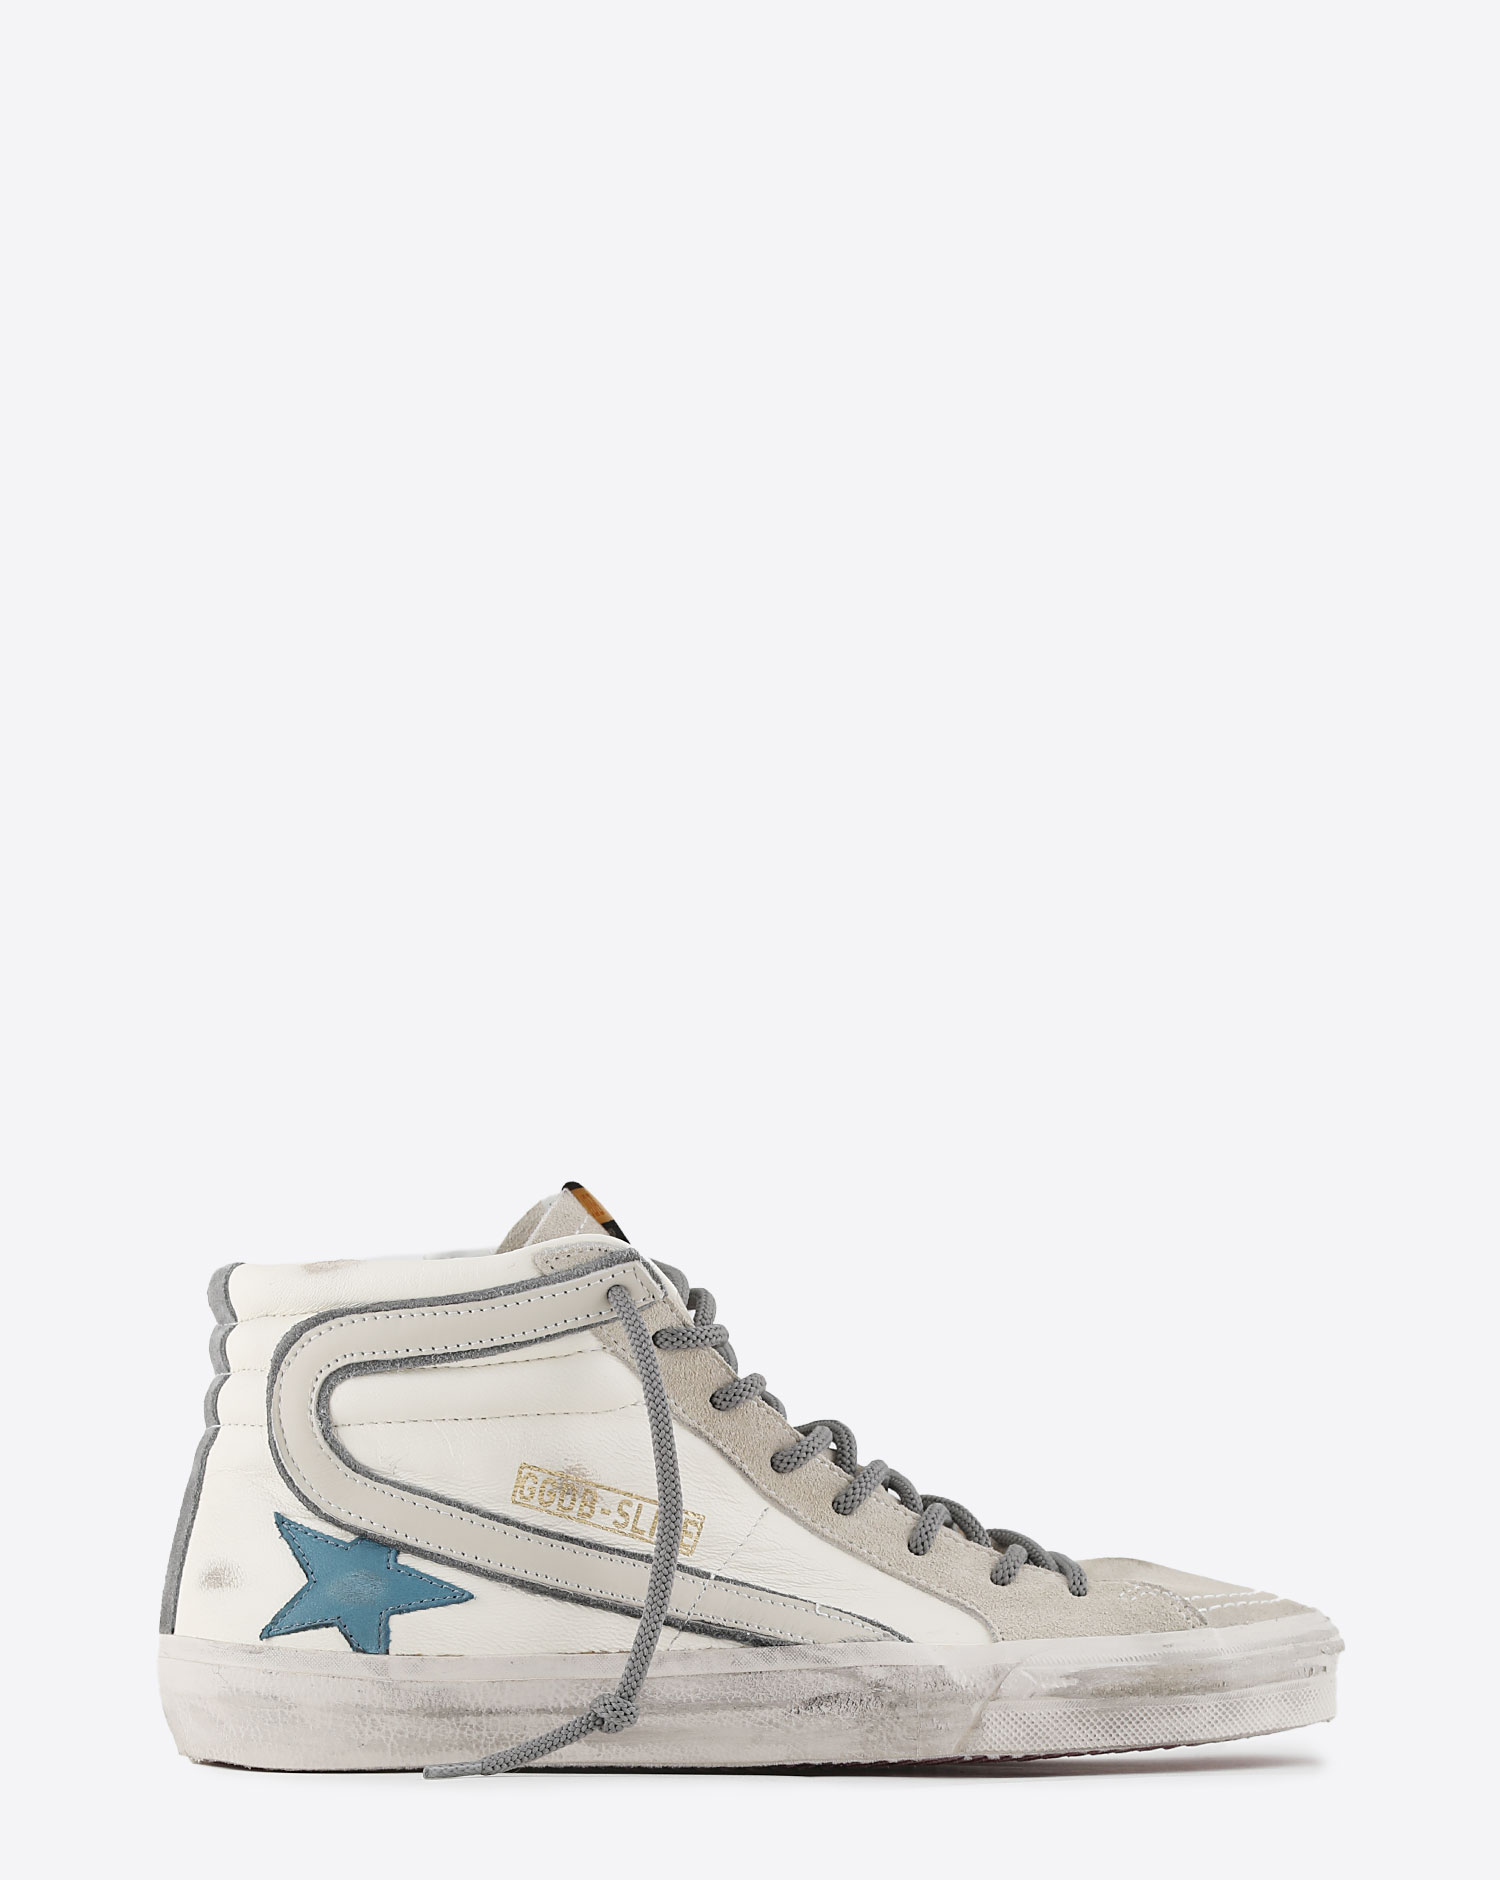 Sneakers Golden Goose Homme White Blue Sand 11382 